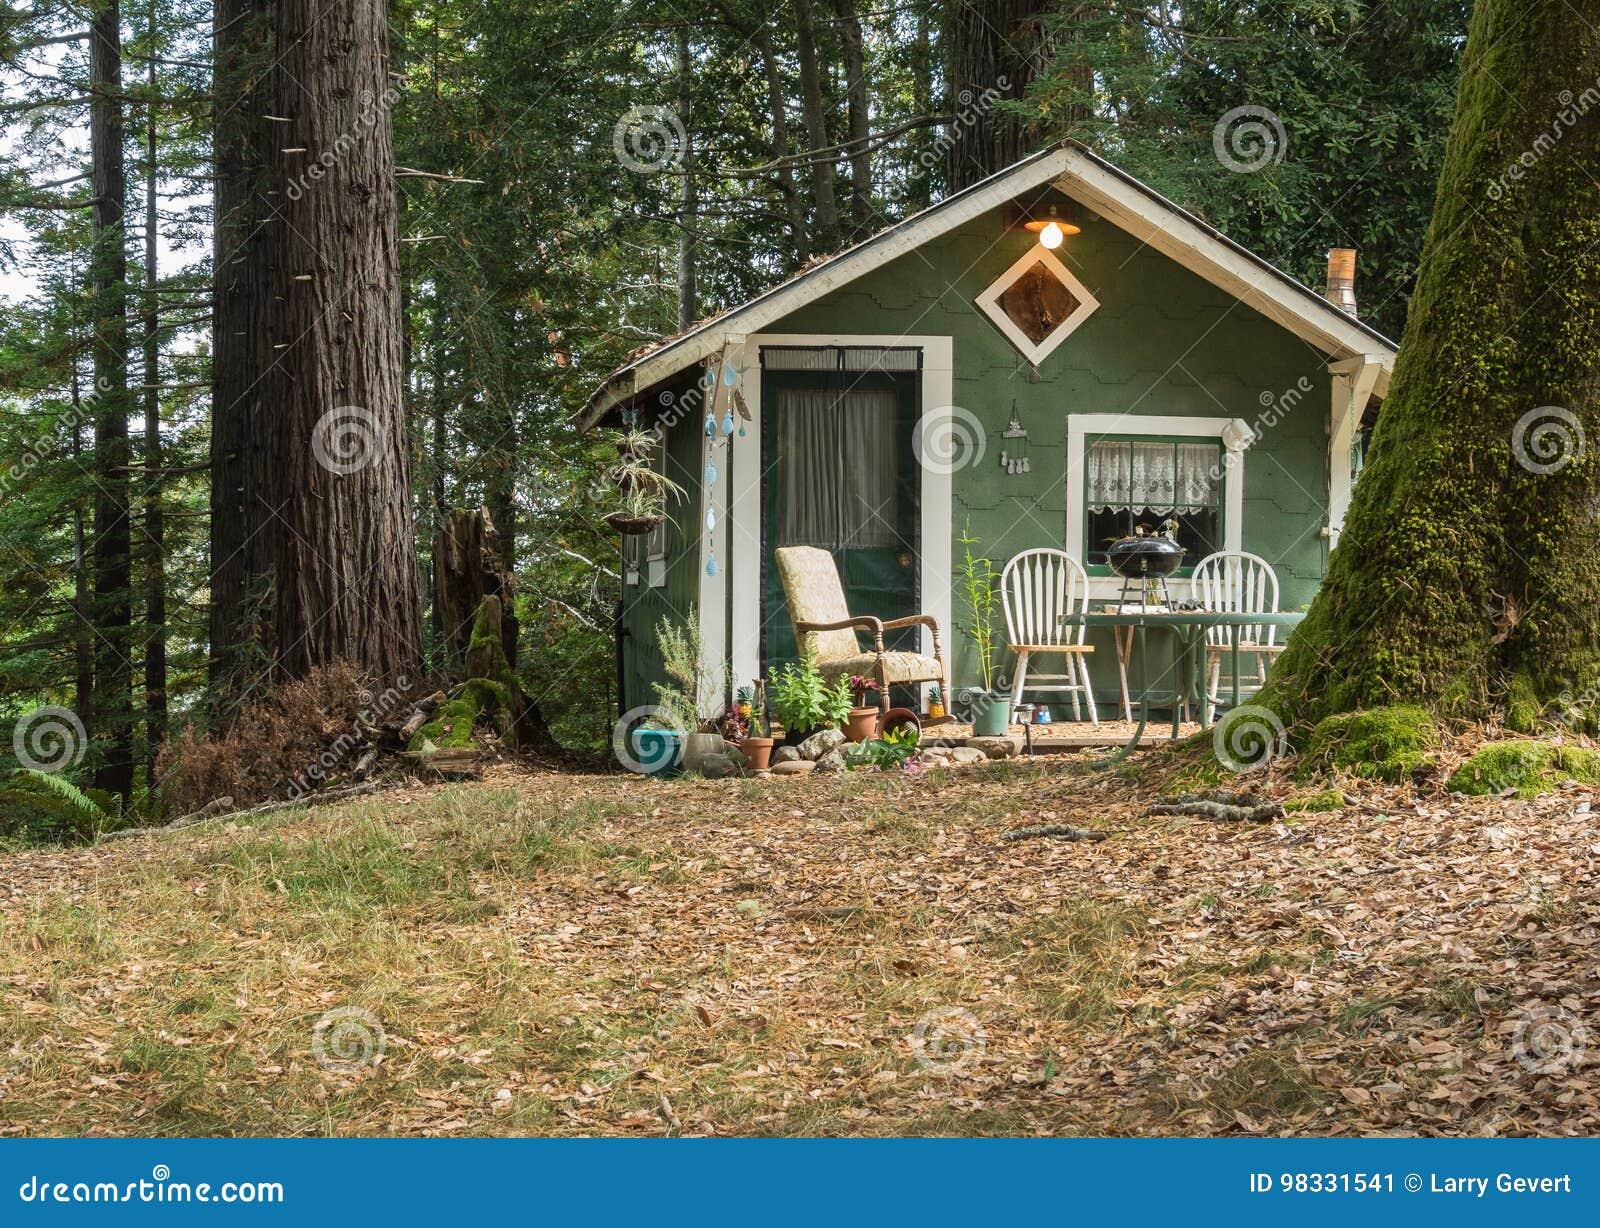  Little  house  in the forest  stock image Image of home 98331541